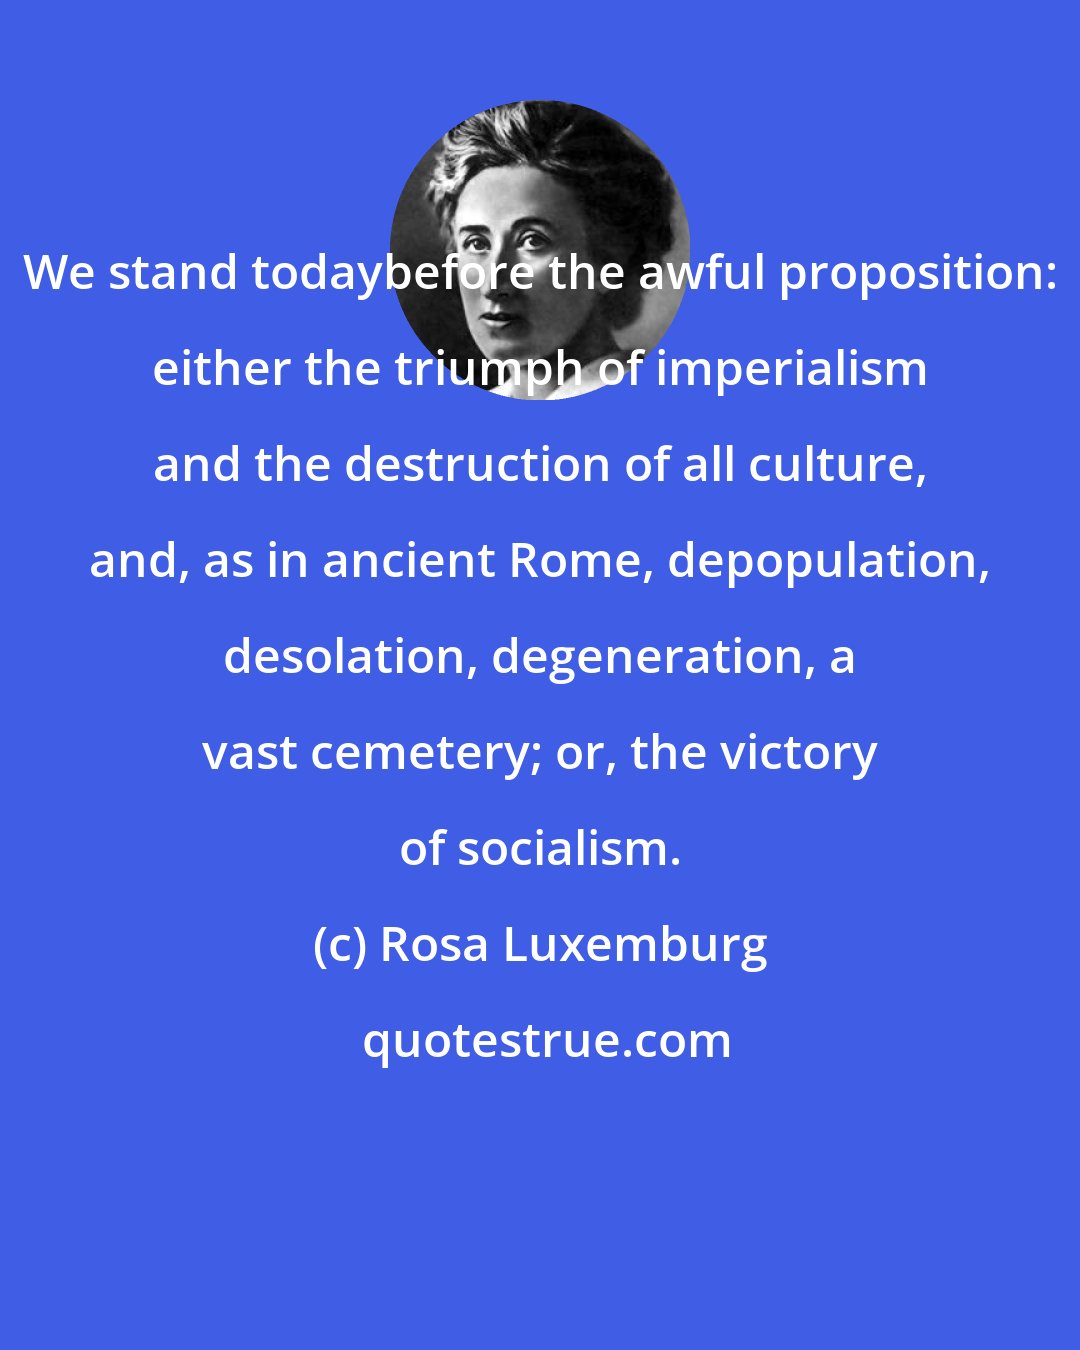 Rosa Luxemburg: We stand todaybefore the awful proposition: either the triumph of imperialism and the destruction of all culture, and, as in ancient Rome, depopulation, desolation, degeneration, a vast cemetery; or, the victory of socialism.